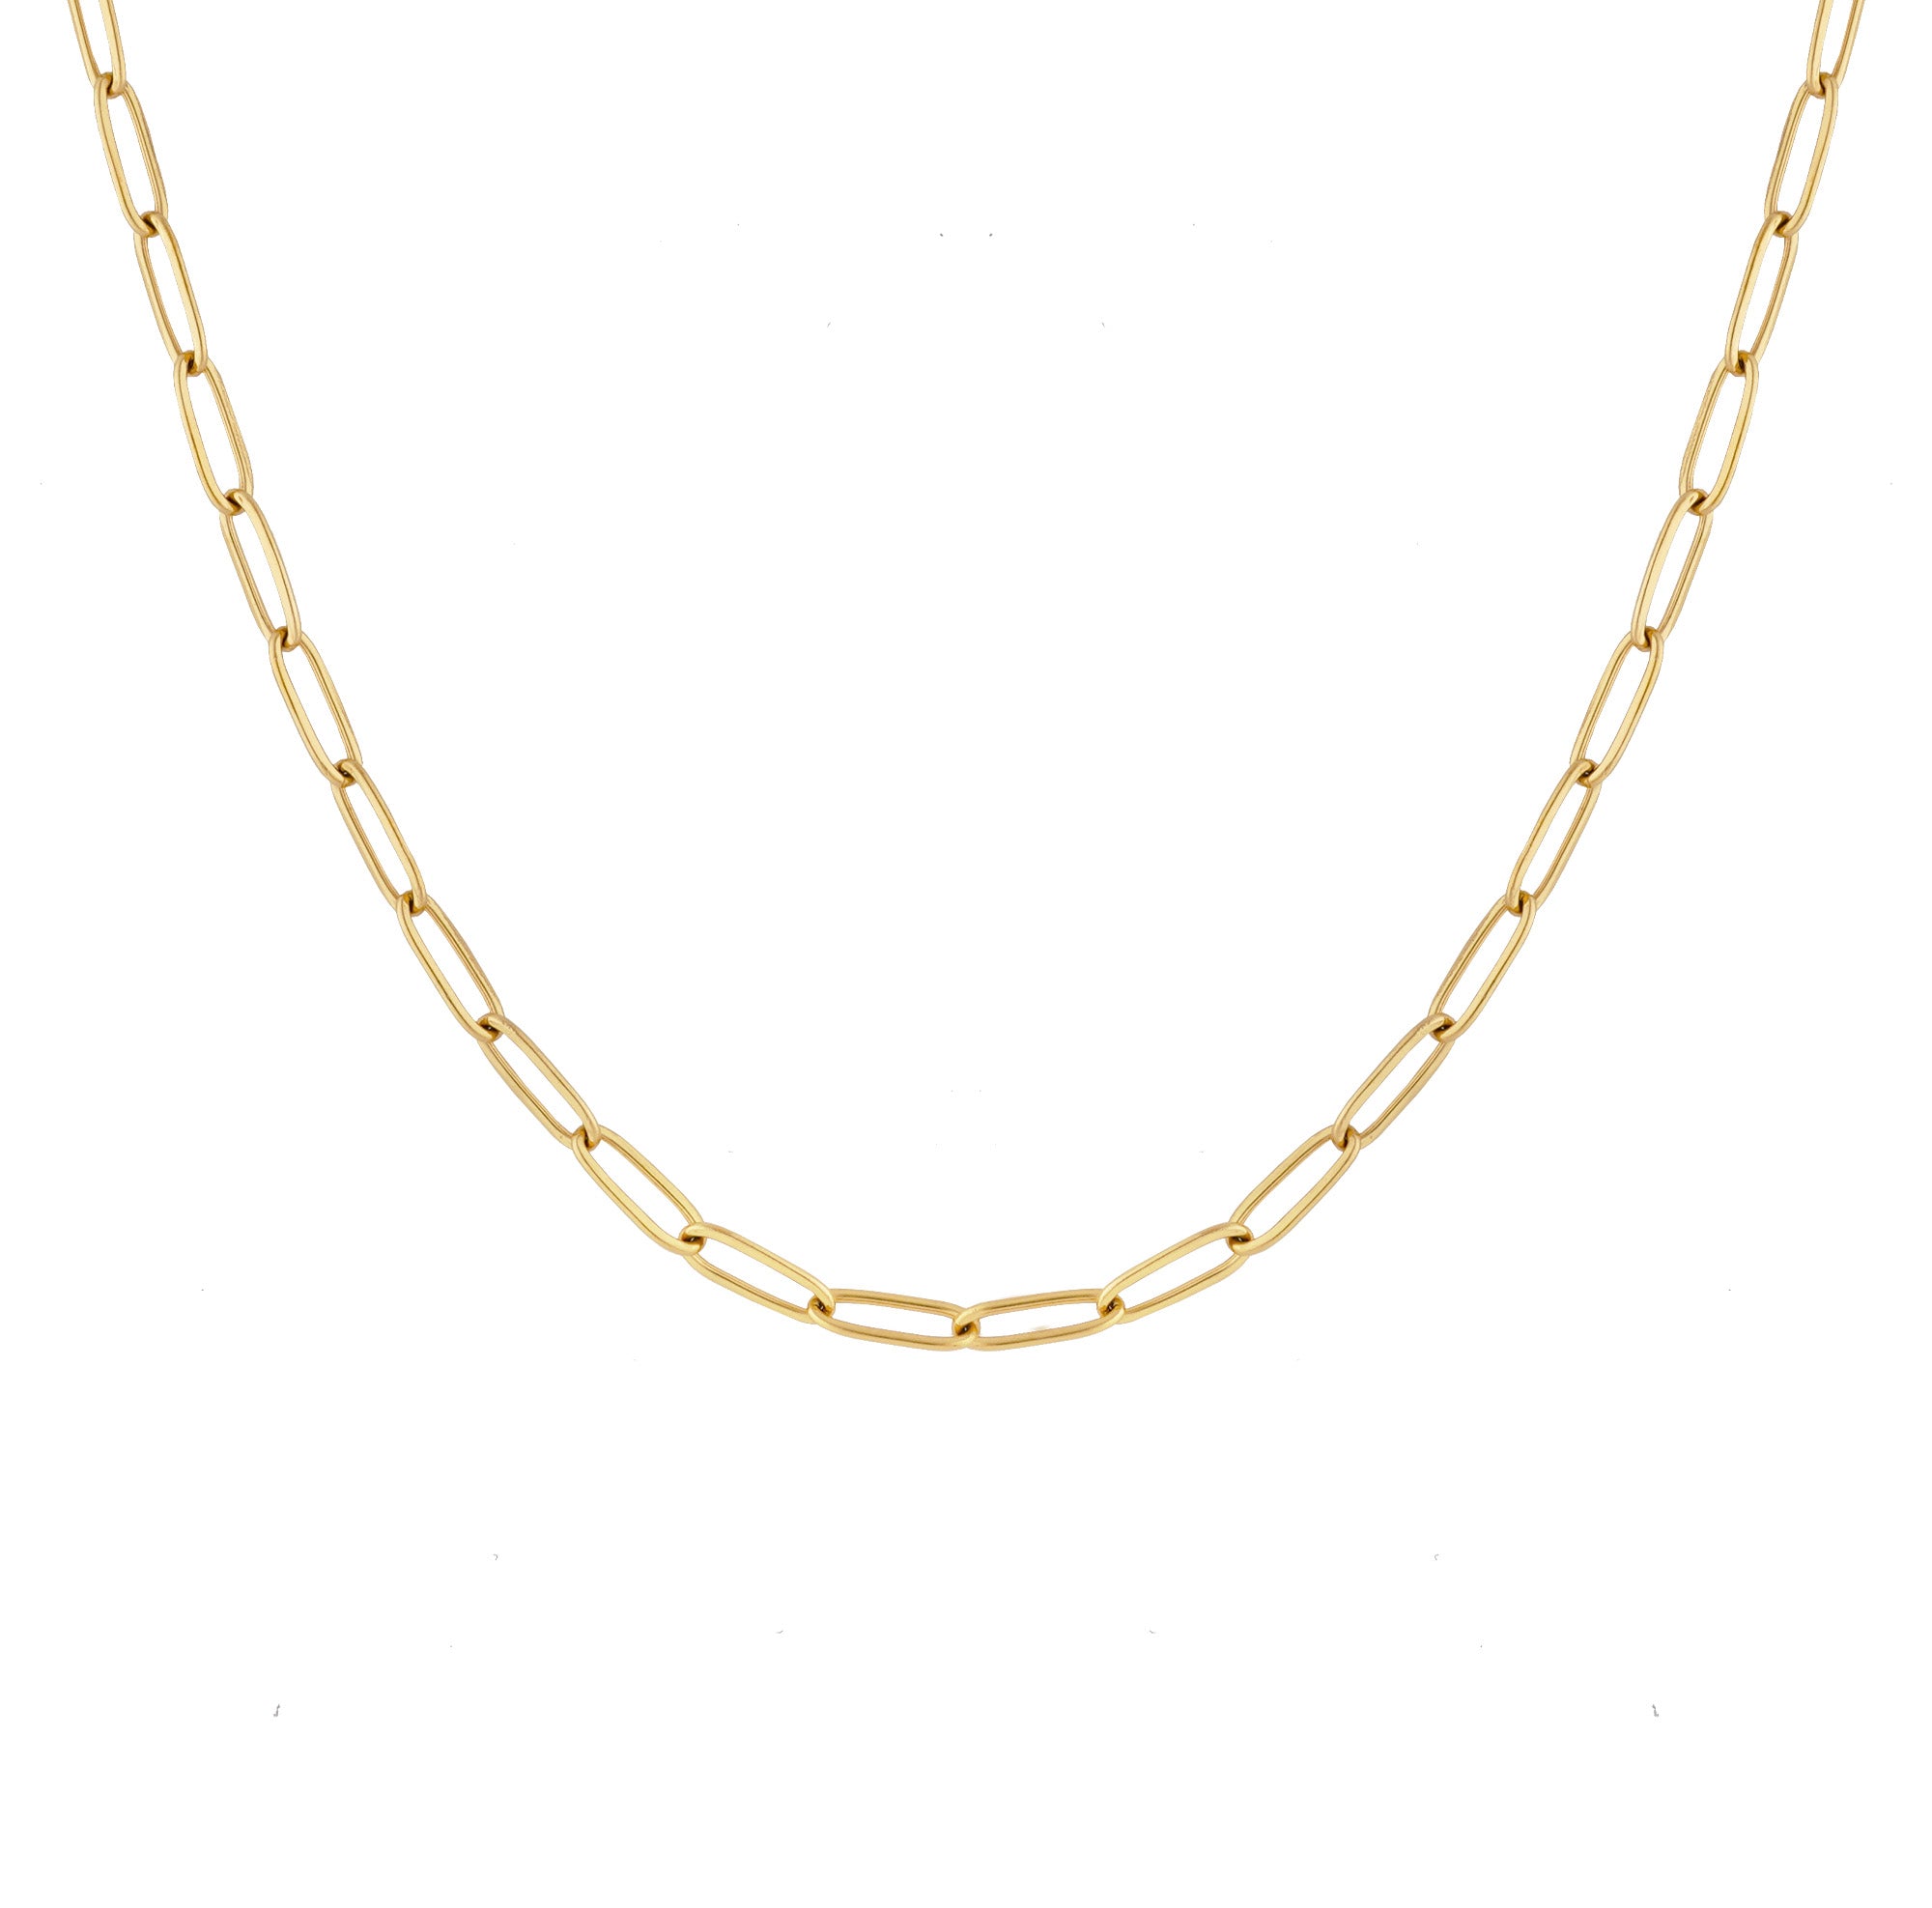 PRAZ men's necklace by Five Jwlry, crafted from a 5mm paperclip chain in gold-colored, water-resistant 316L stainless steel. Available in sizes 45cm, 50cm, and 55cm. Hypoallergenic with a 2-year warranty.